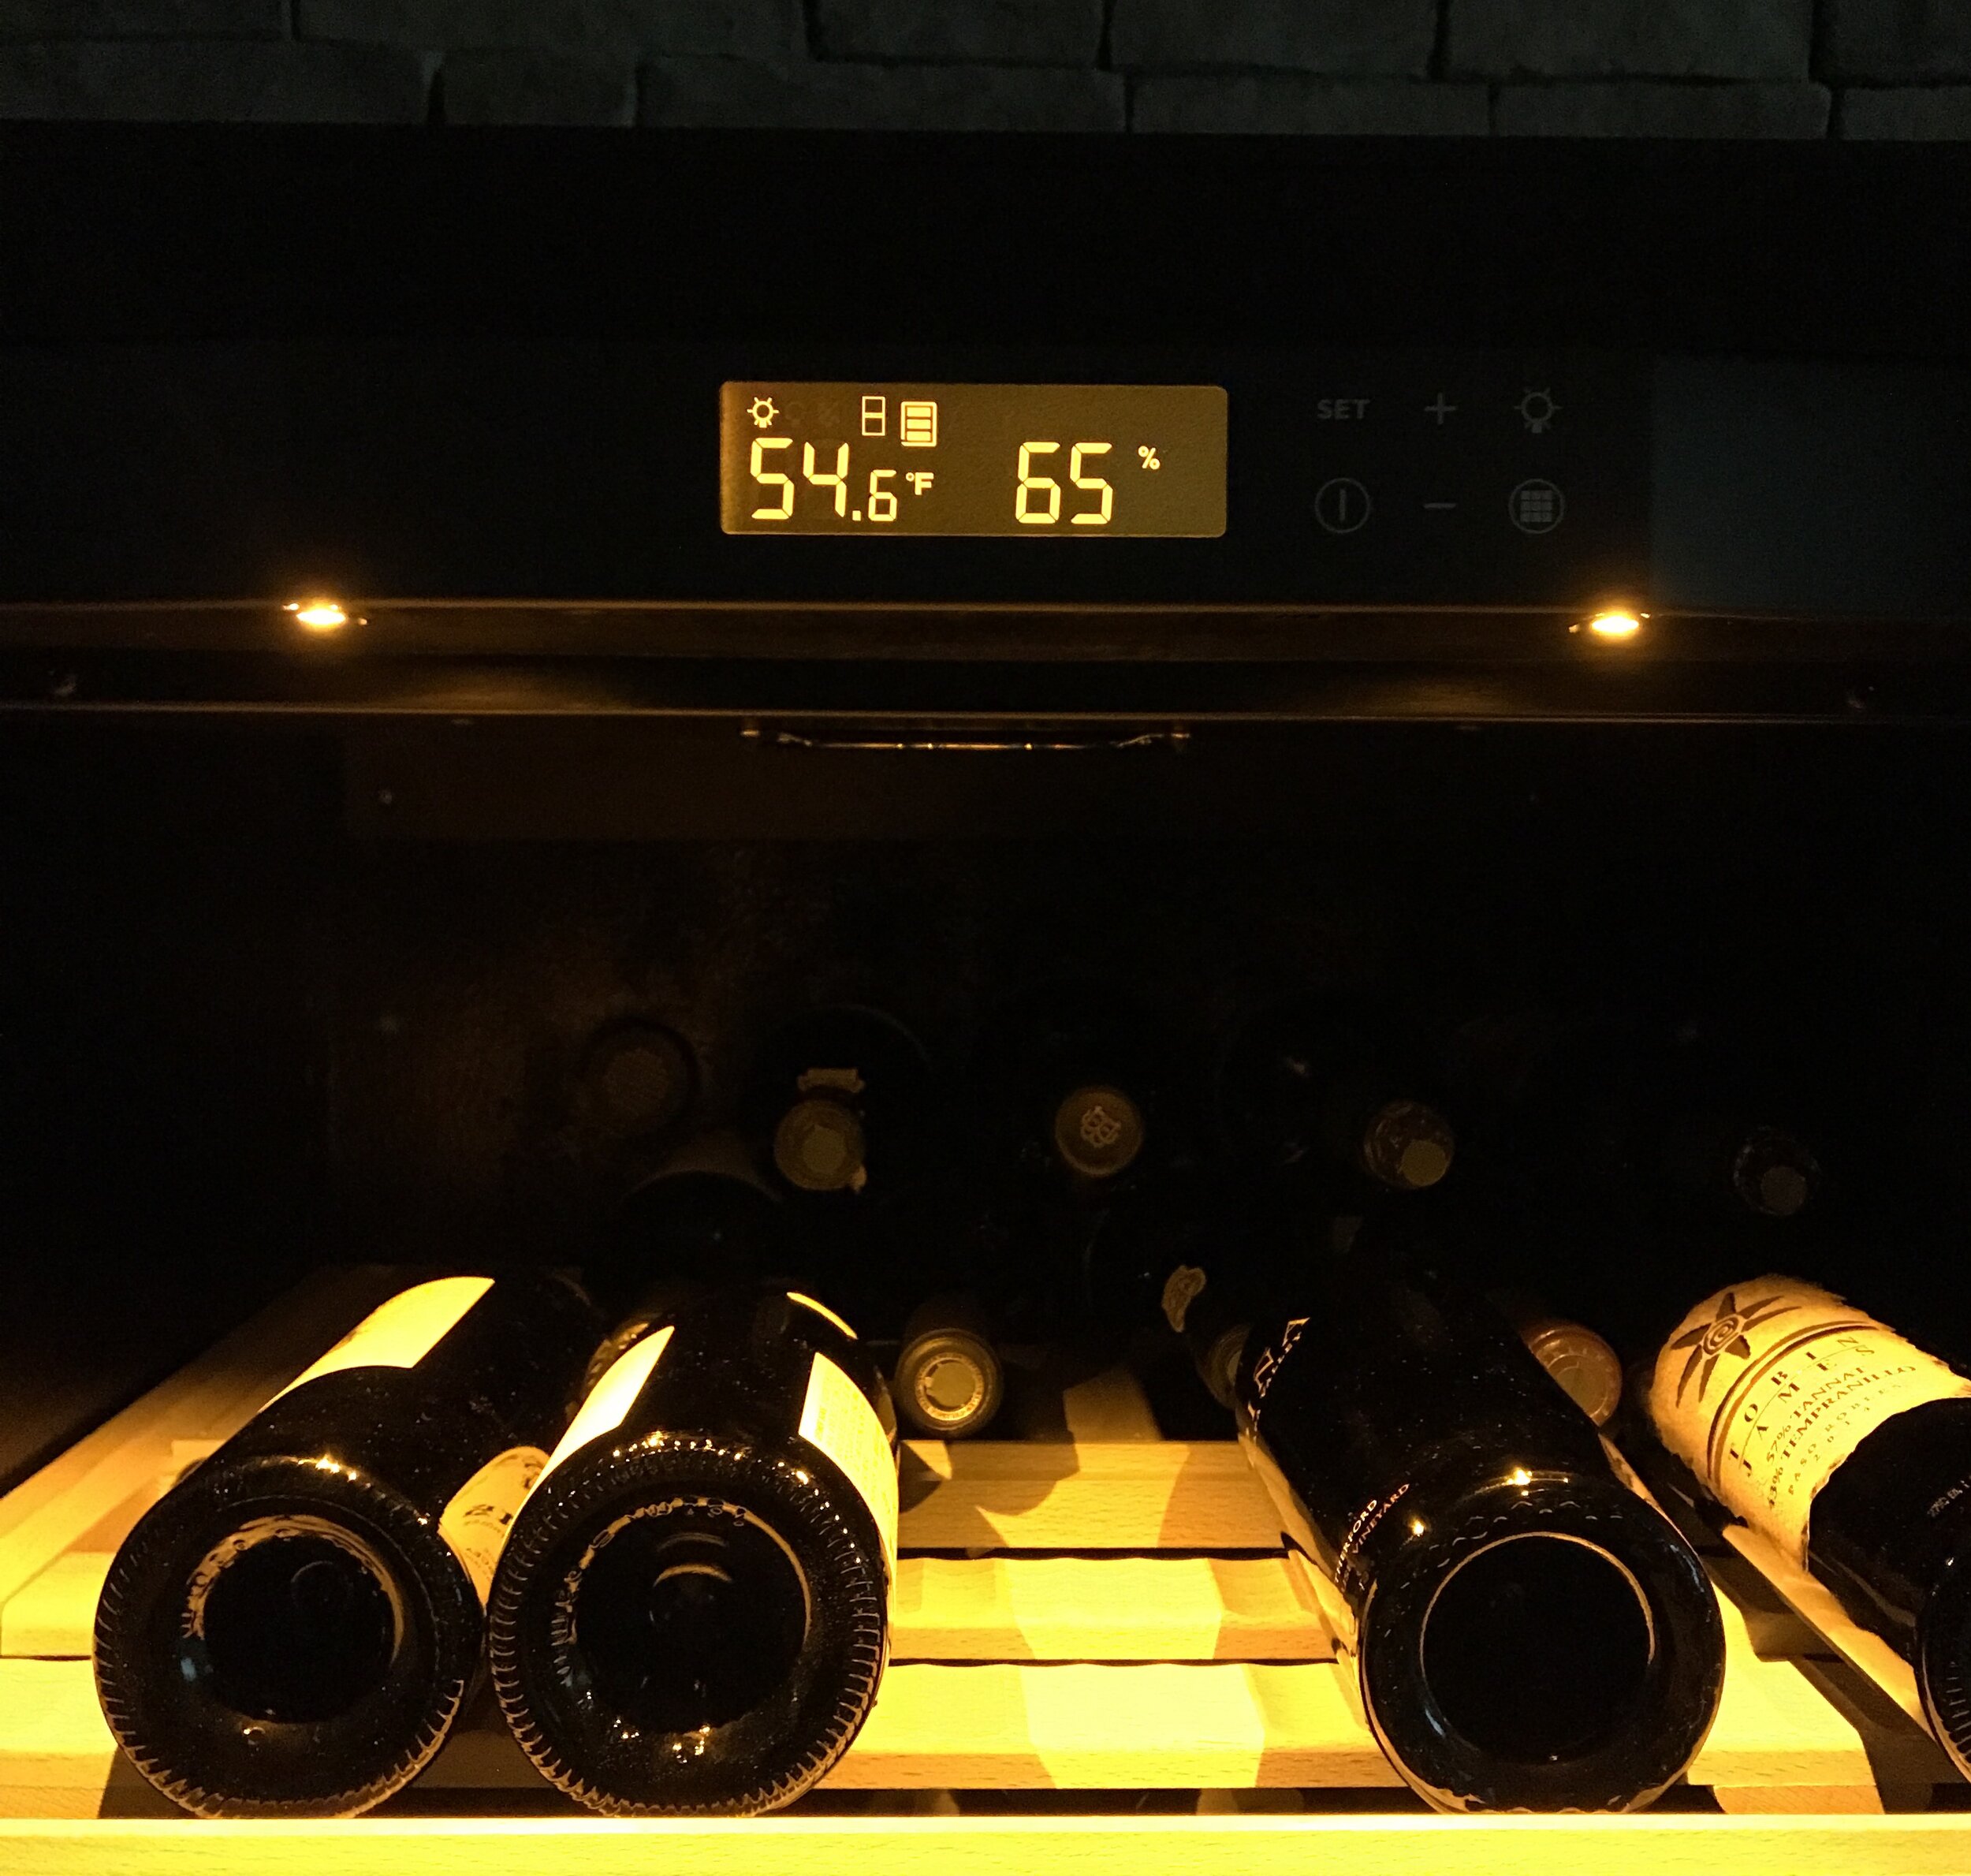 Wholesale digital wine cellar thermometer To Cool Your Wine And Beverages 